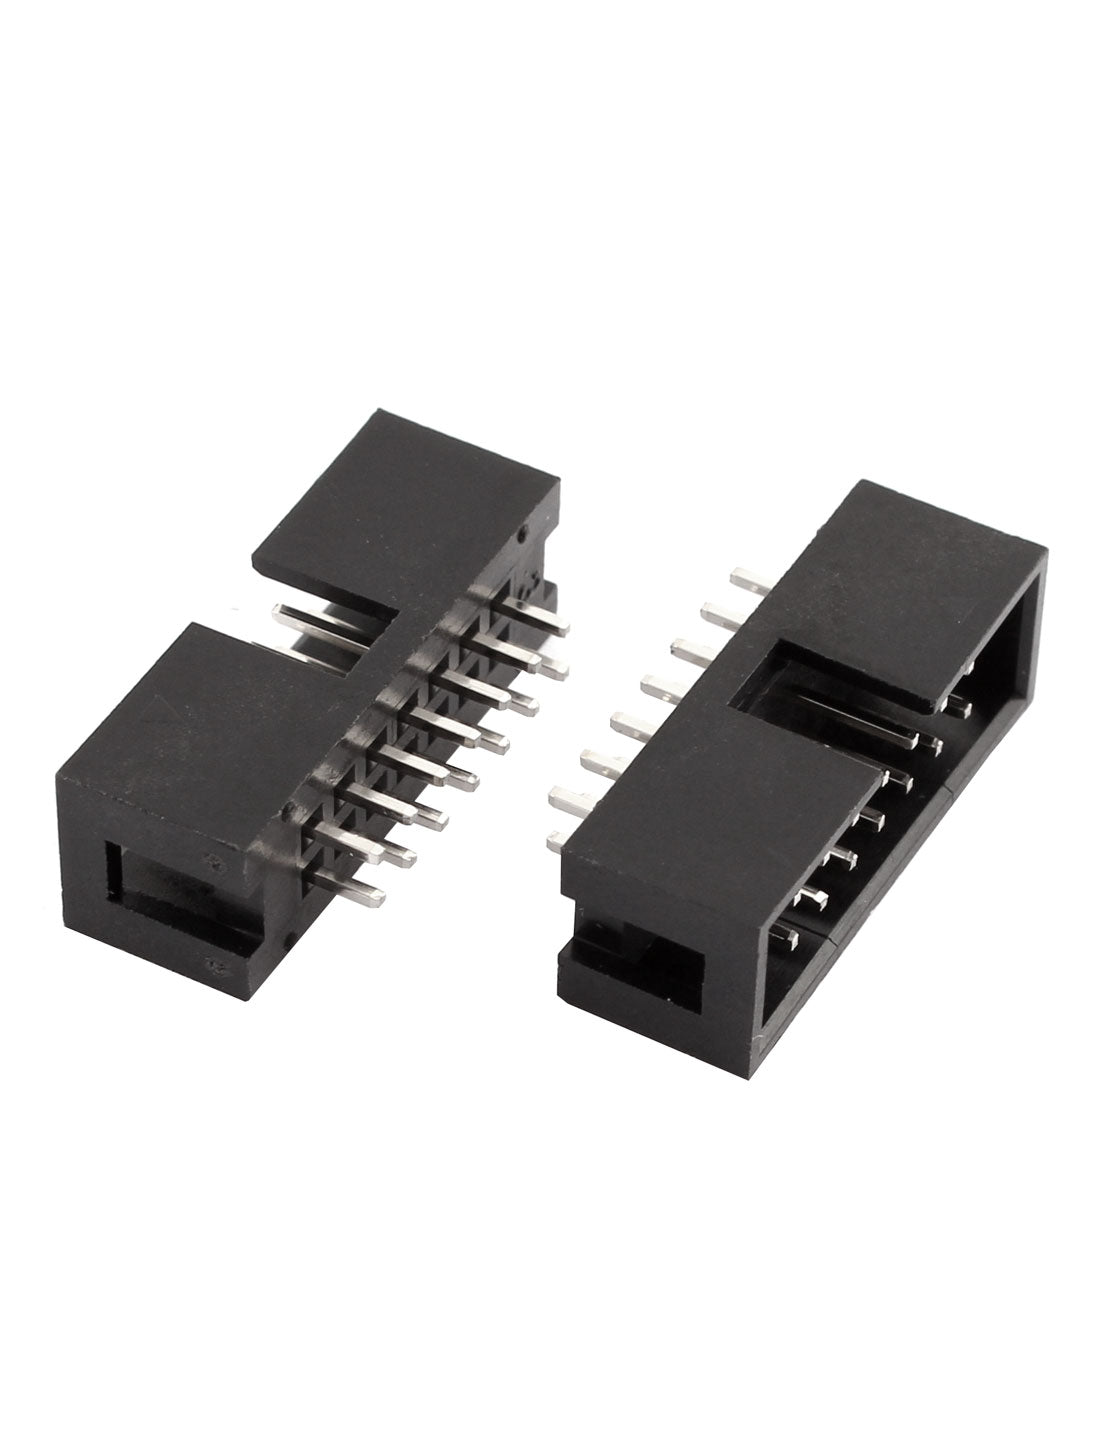 uxcell Uxcell 28pcs 2x7 14-Pin 2.54mm Pitch Straight Box Header Connector IDC Male Sockets